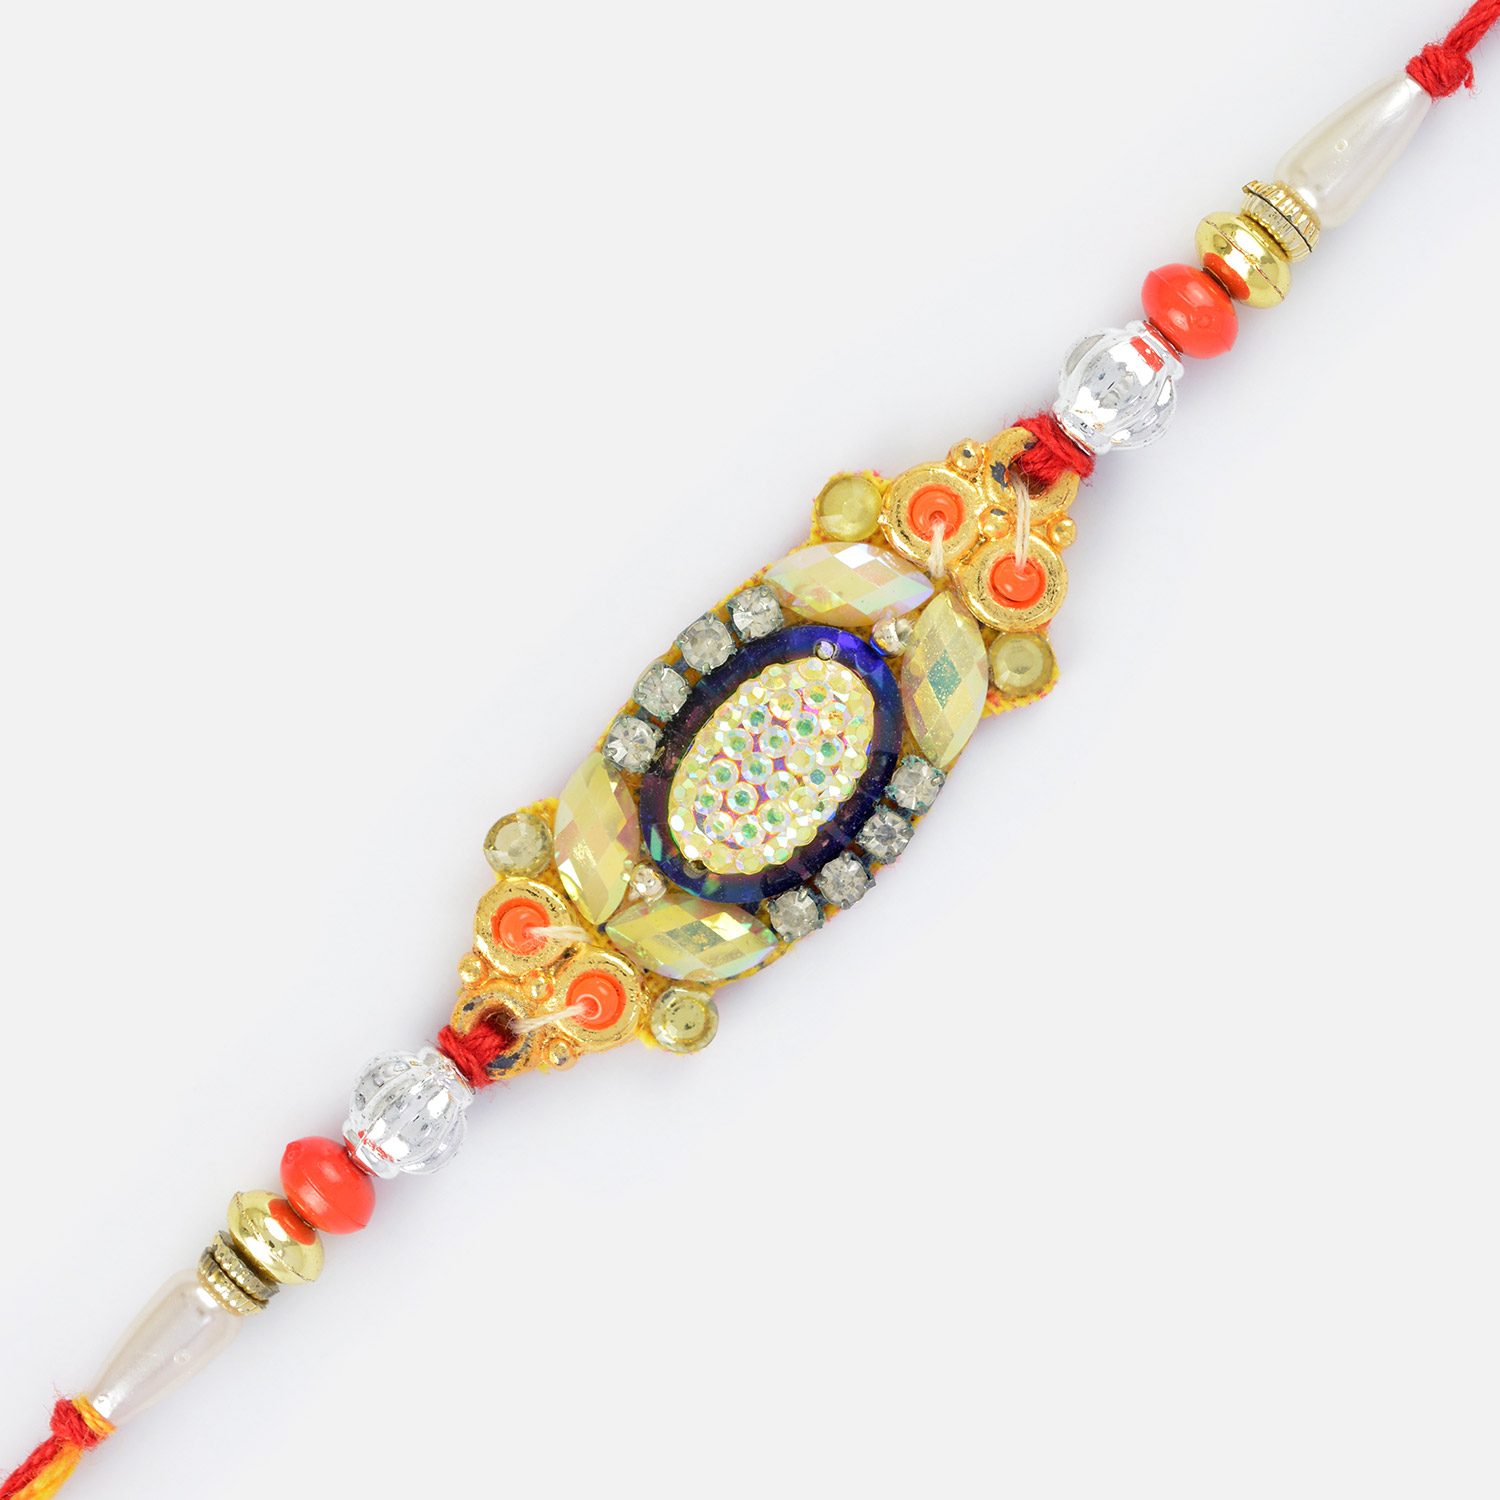 Fancy Rakhi with Handcrafted Beads and Colorful Stones